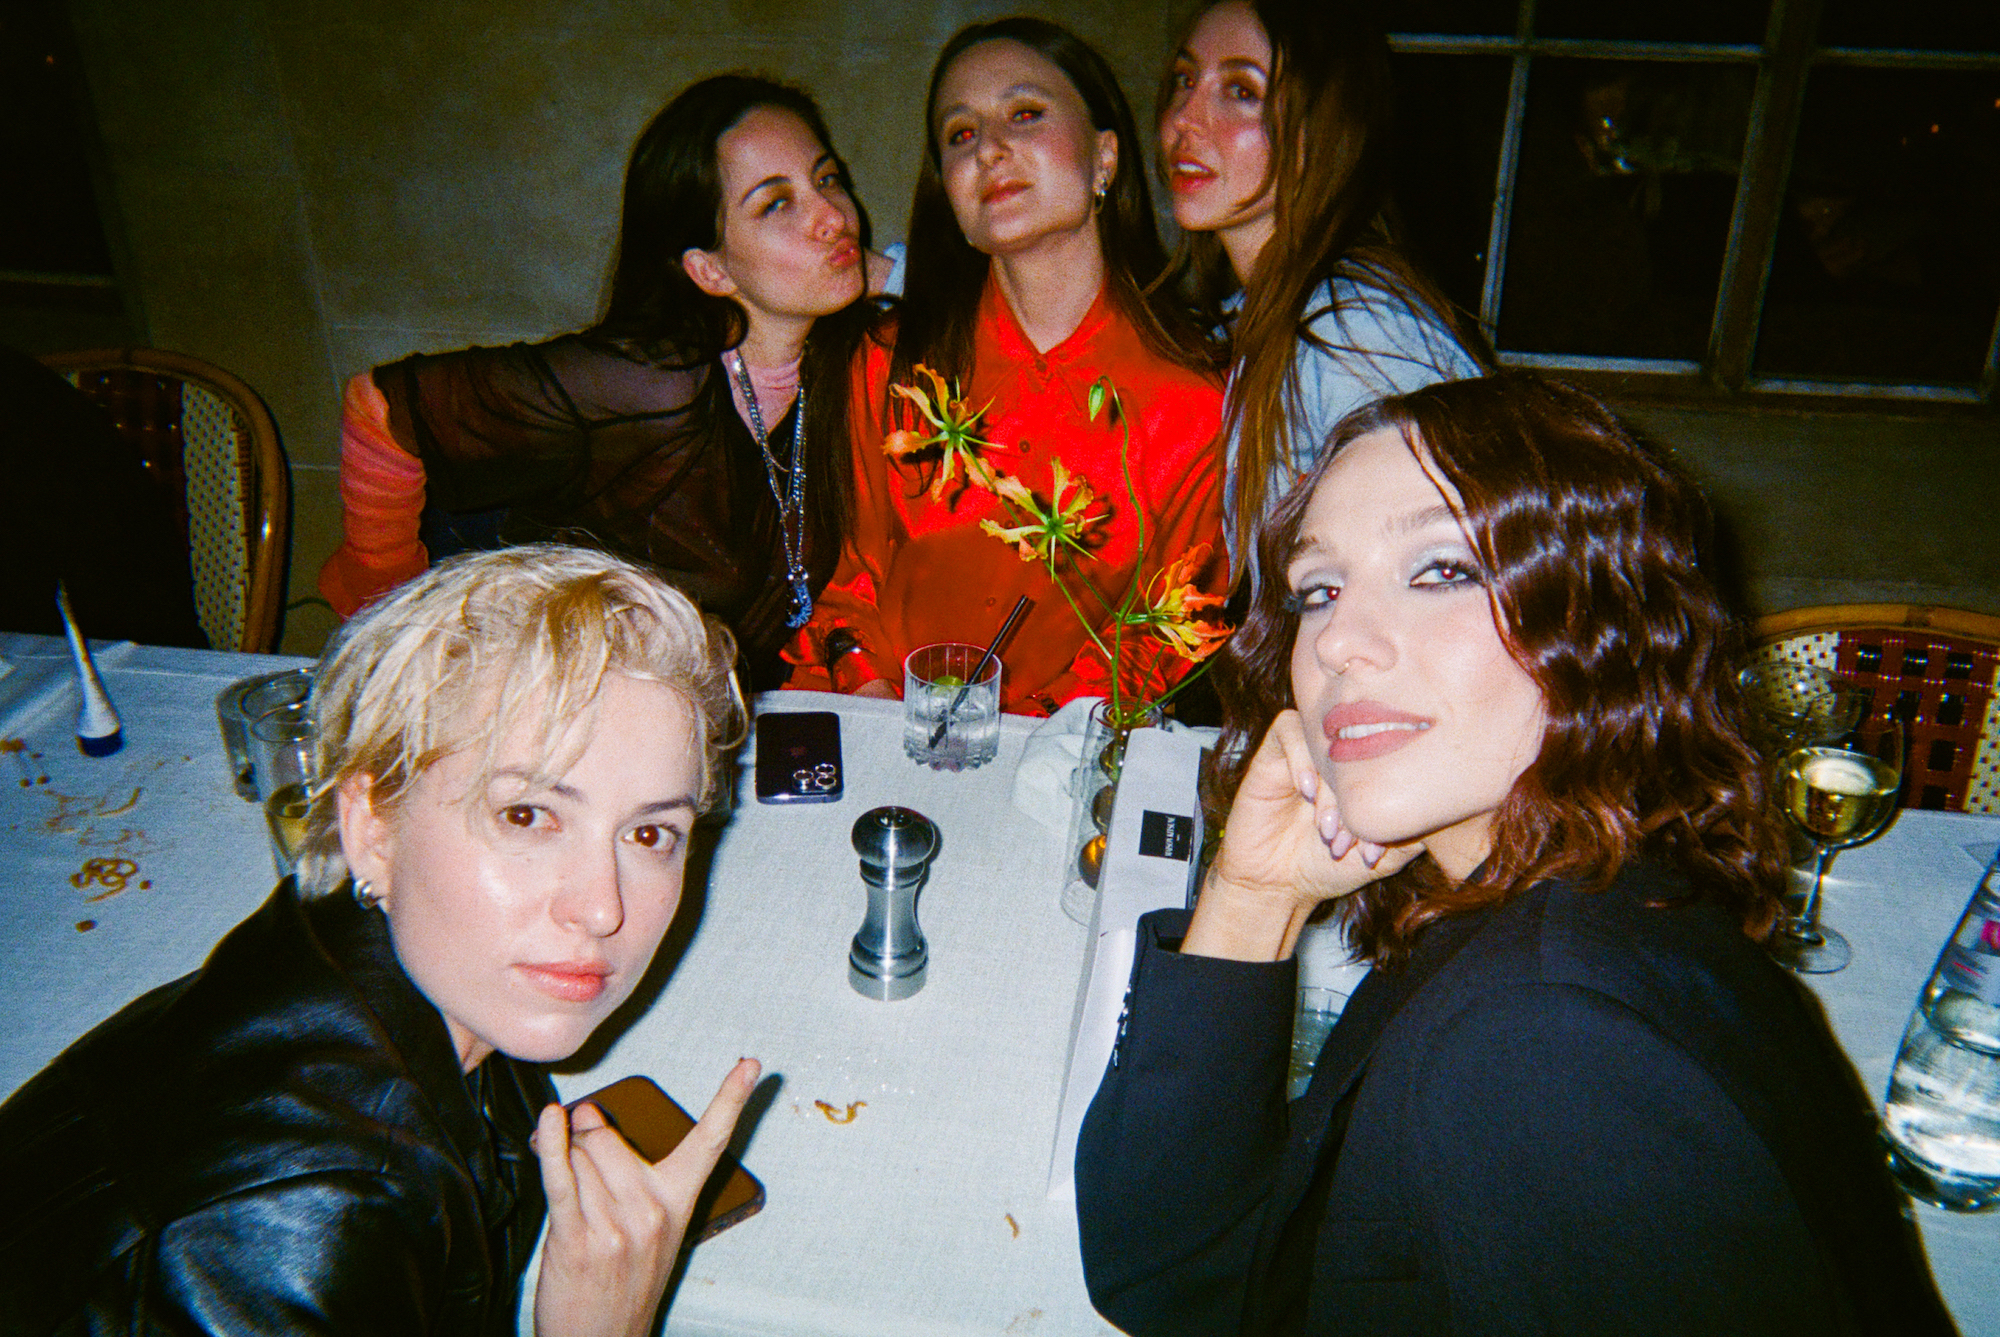 Maison Kitsune pre-grammys dinner hosting musicians at the Chateau Marmont in Los Angeles